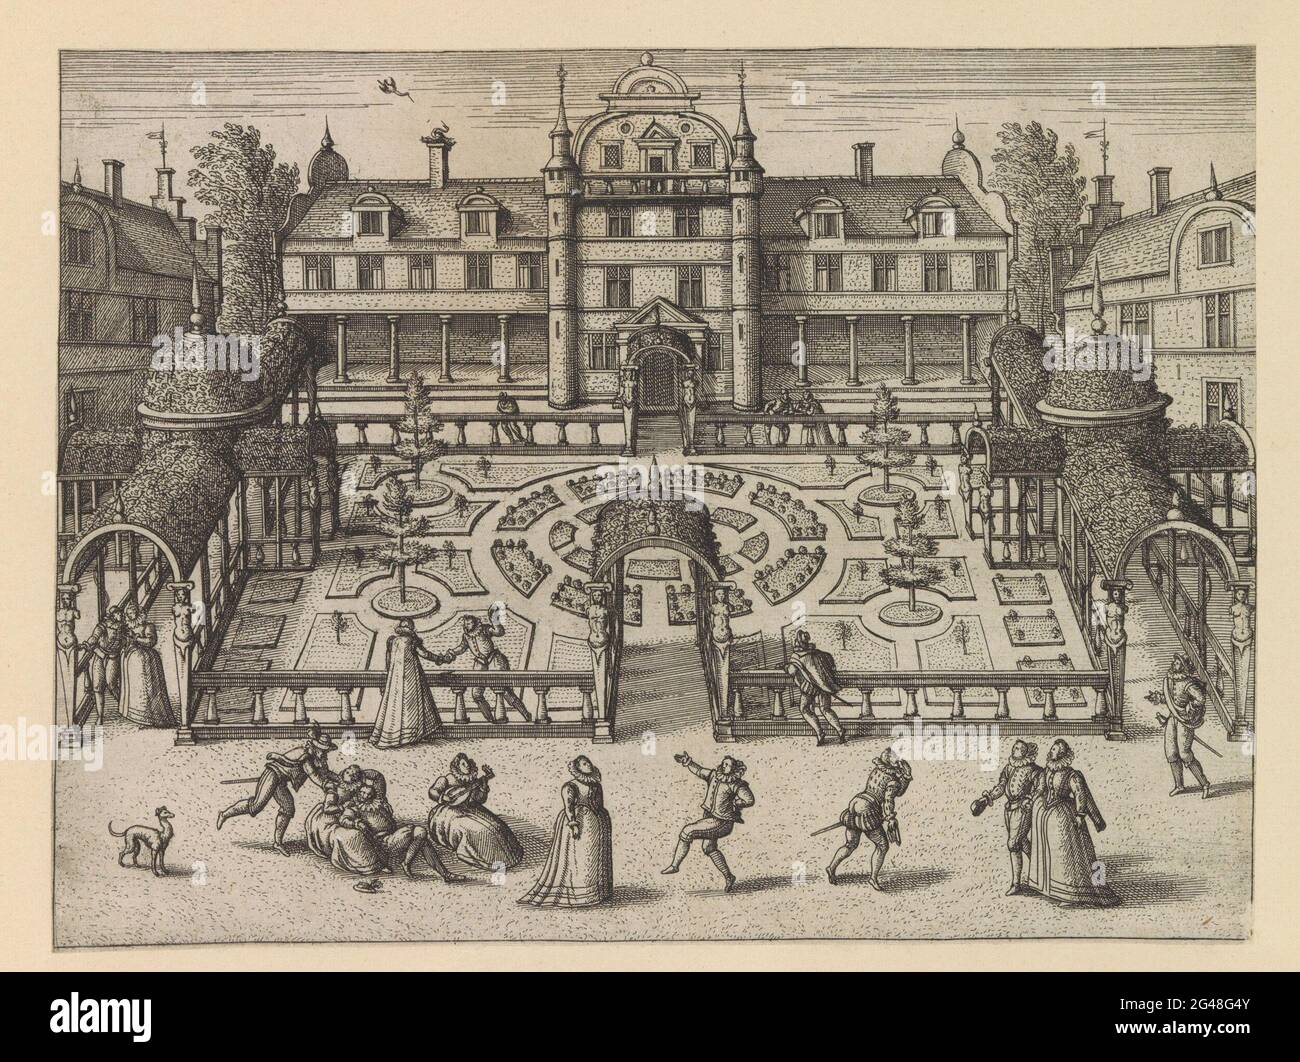 Hoftuin with music and dance; Hortorum viridariorumque elegantes et  multiplicis formae; Gardens of Minne. Hoft garden with couples walking  together and making fun. In the foreground a man dances for a woman,